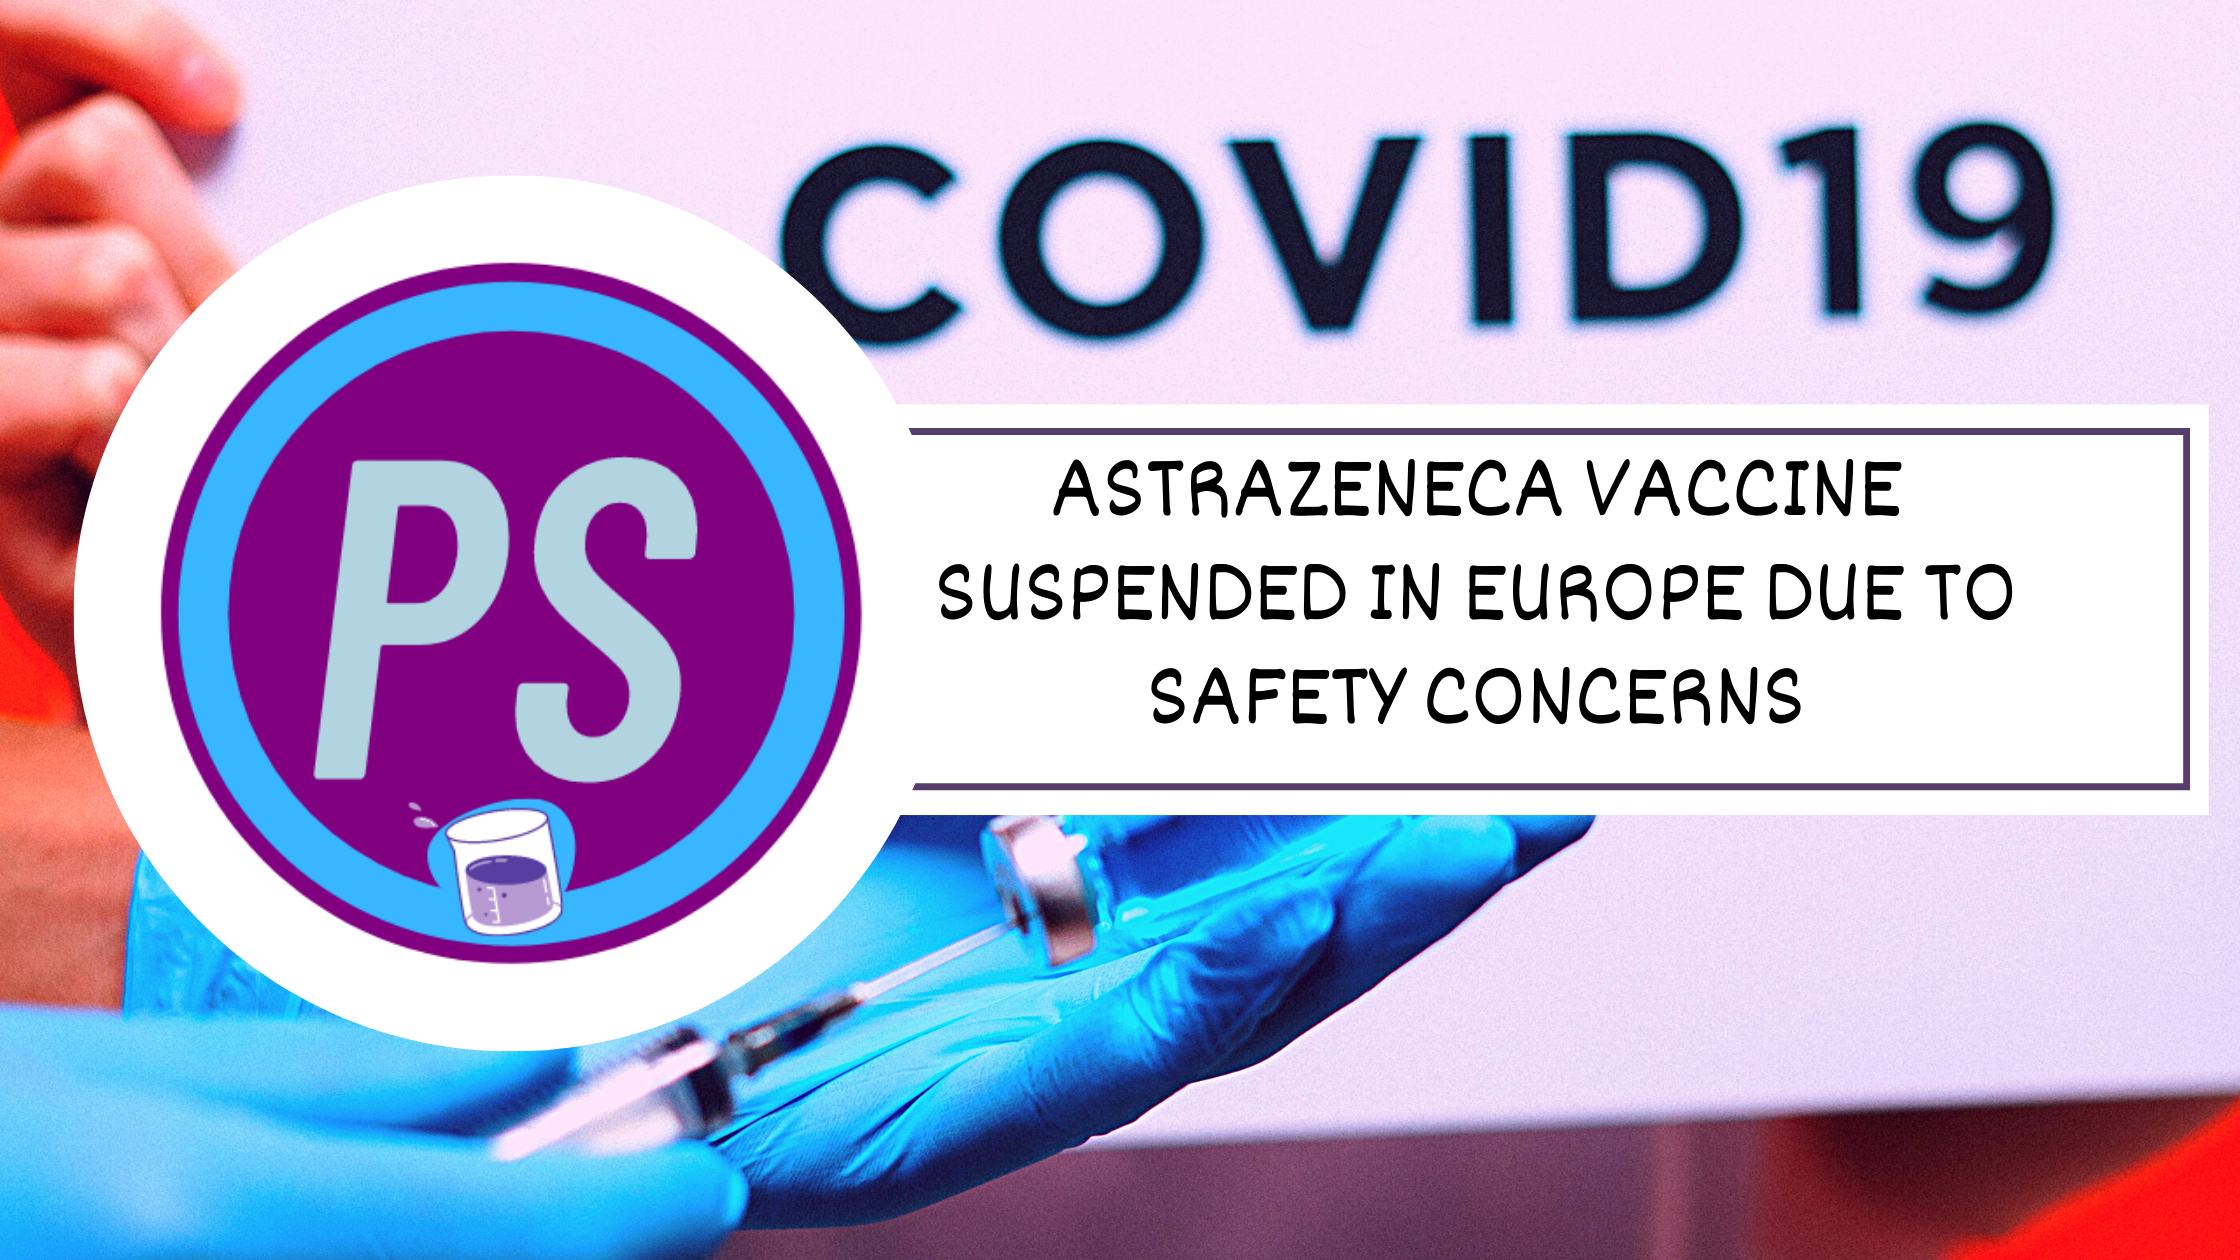 AstraZeneca vaccine suspended in Europe due to safety concerns